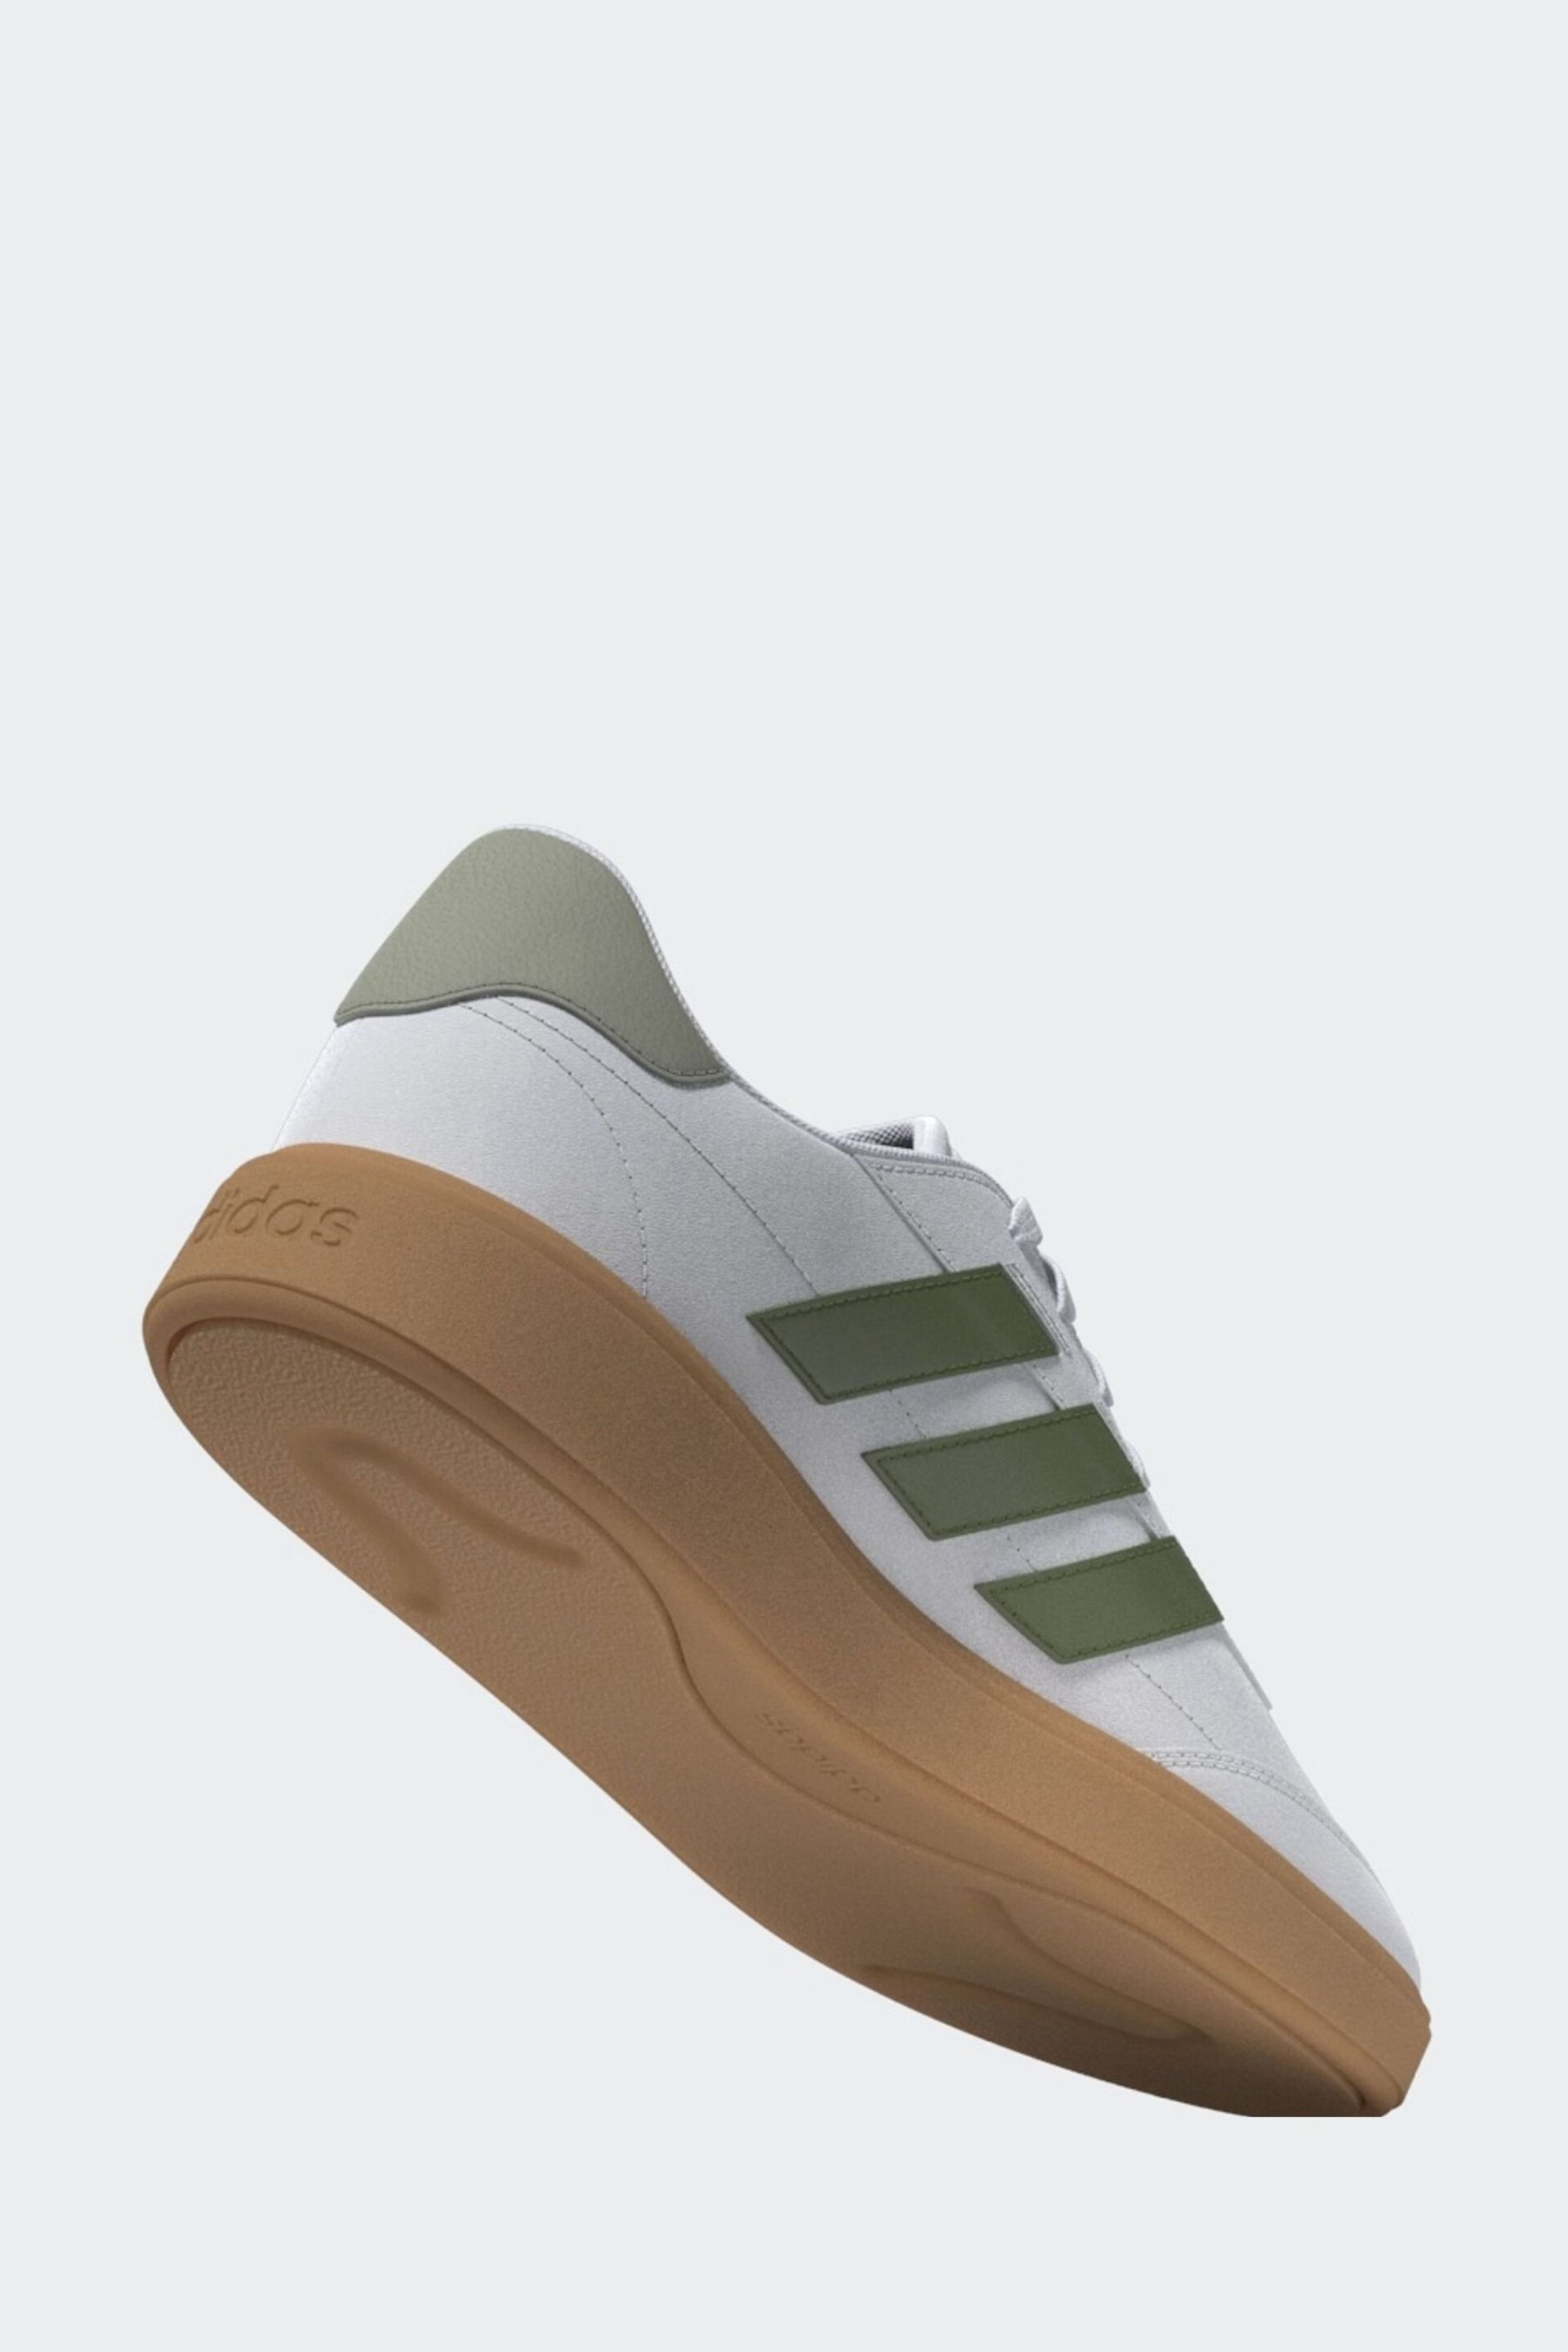 adidas White Courtblock Trainers - Image 7 of 18